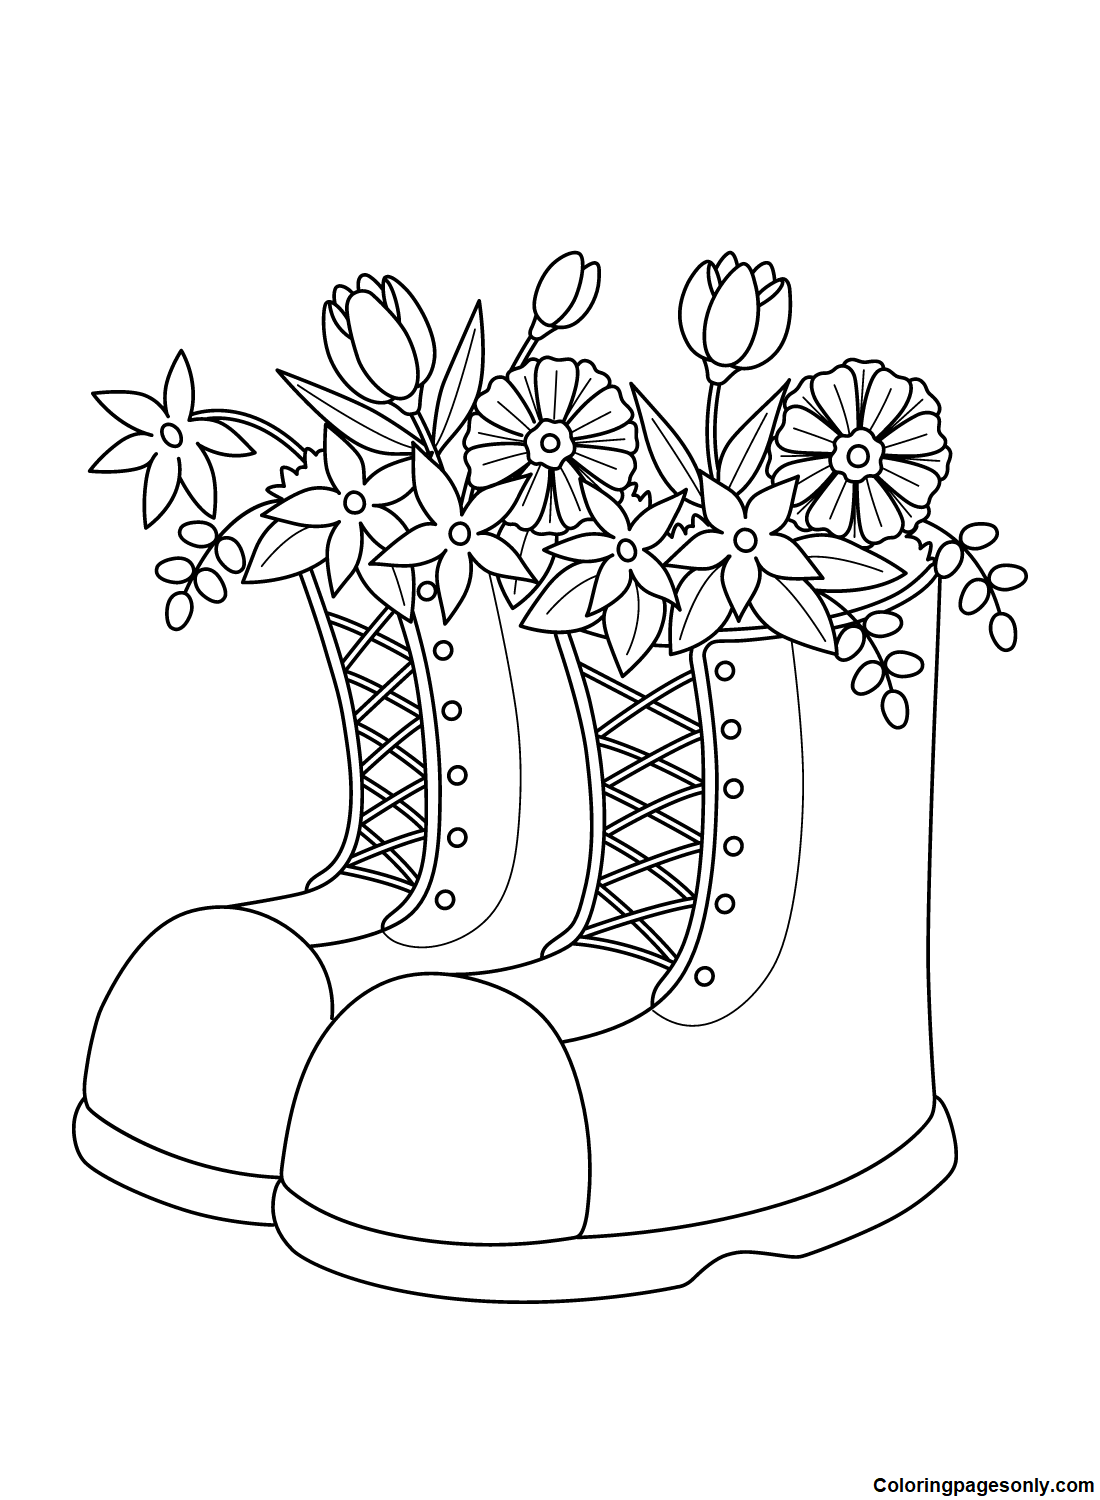 Spring Boots with Flowers Coloring Page